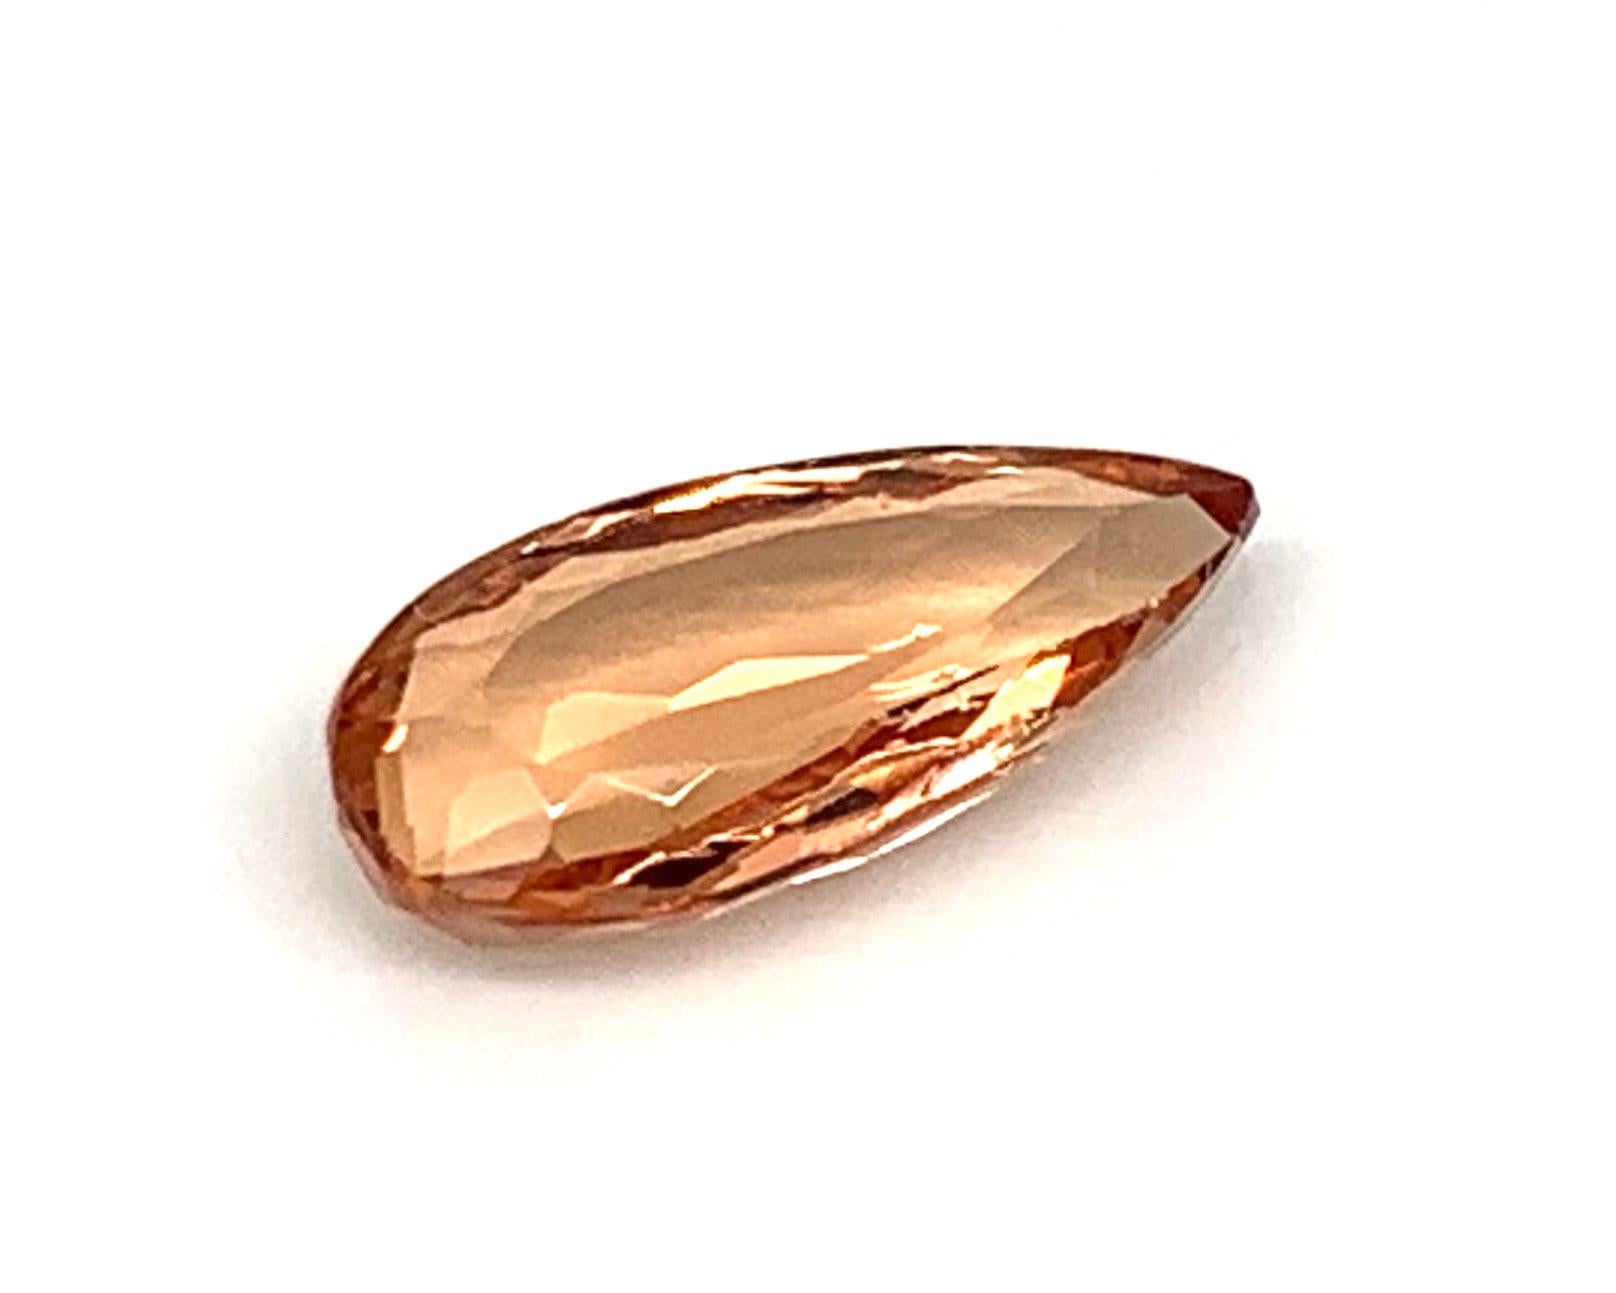 This elongated pear shaped precious topaz is also known as Imperial topaz, recognized for its luscious peach color. Precious topazes are sometimes faceted in such a way that they appears larger than their weight would suggest, while still displaying